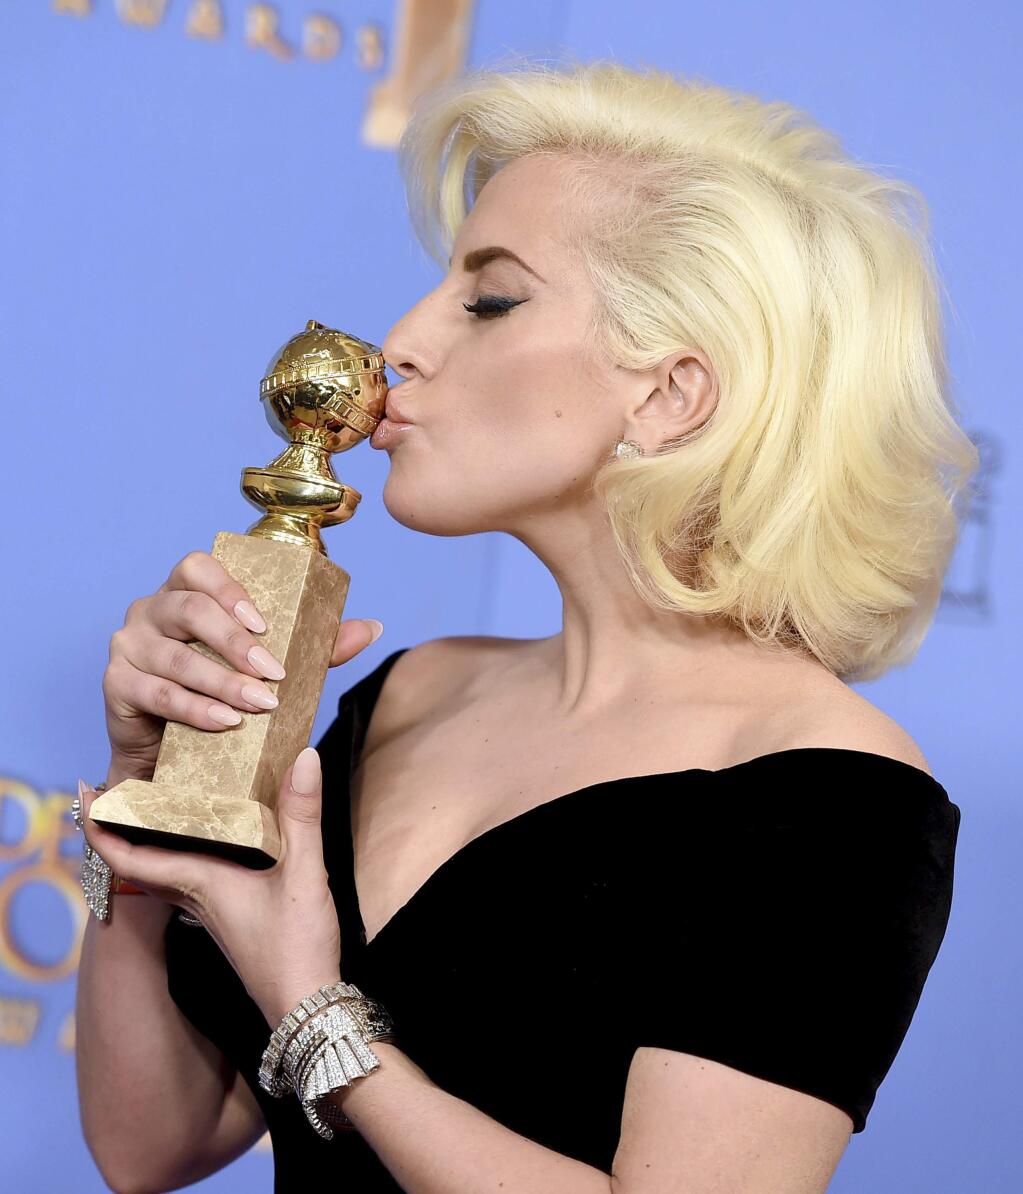 FILE - In this Jan. 10, 2016 file photo, Lady Gaga poses in the press room with the award for best performance by an actress in a limited series or a motion picture made for TV for 'American Horror Story: Hotel' at the 73rd annual Golden Globe Awards in Beverly Hills, Calif. Lady Gaga released her latest album, 'Joanne,' on Friday, Oct. 21, 2016. (Photo by Jordan Strauss/Invision/AP, File)